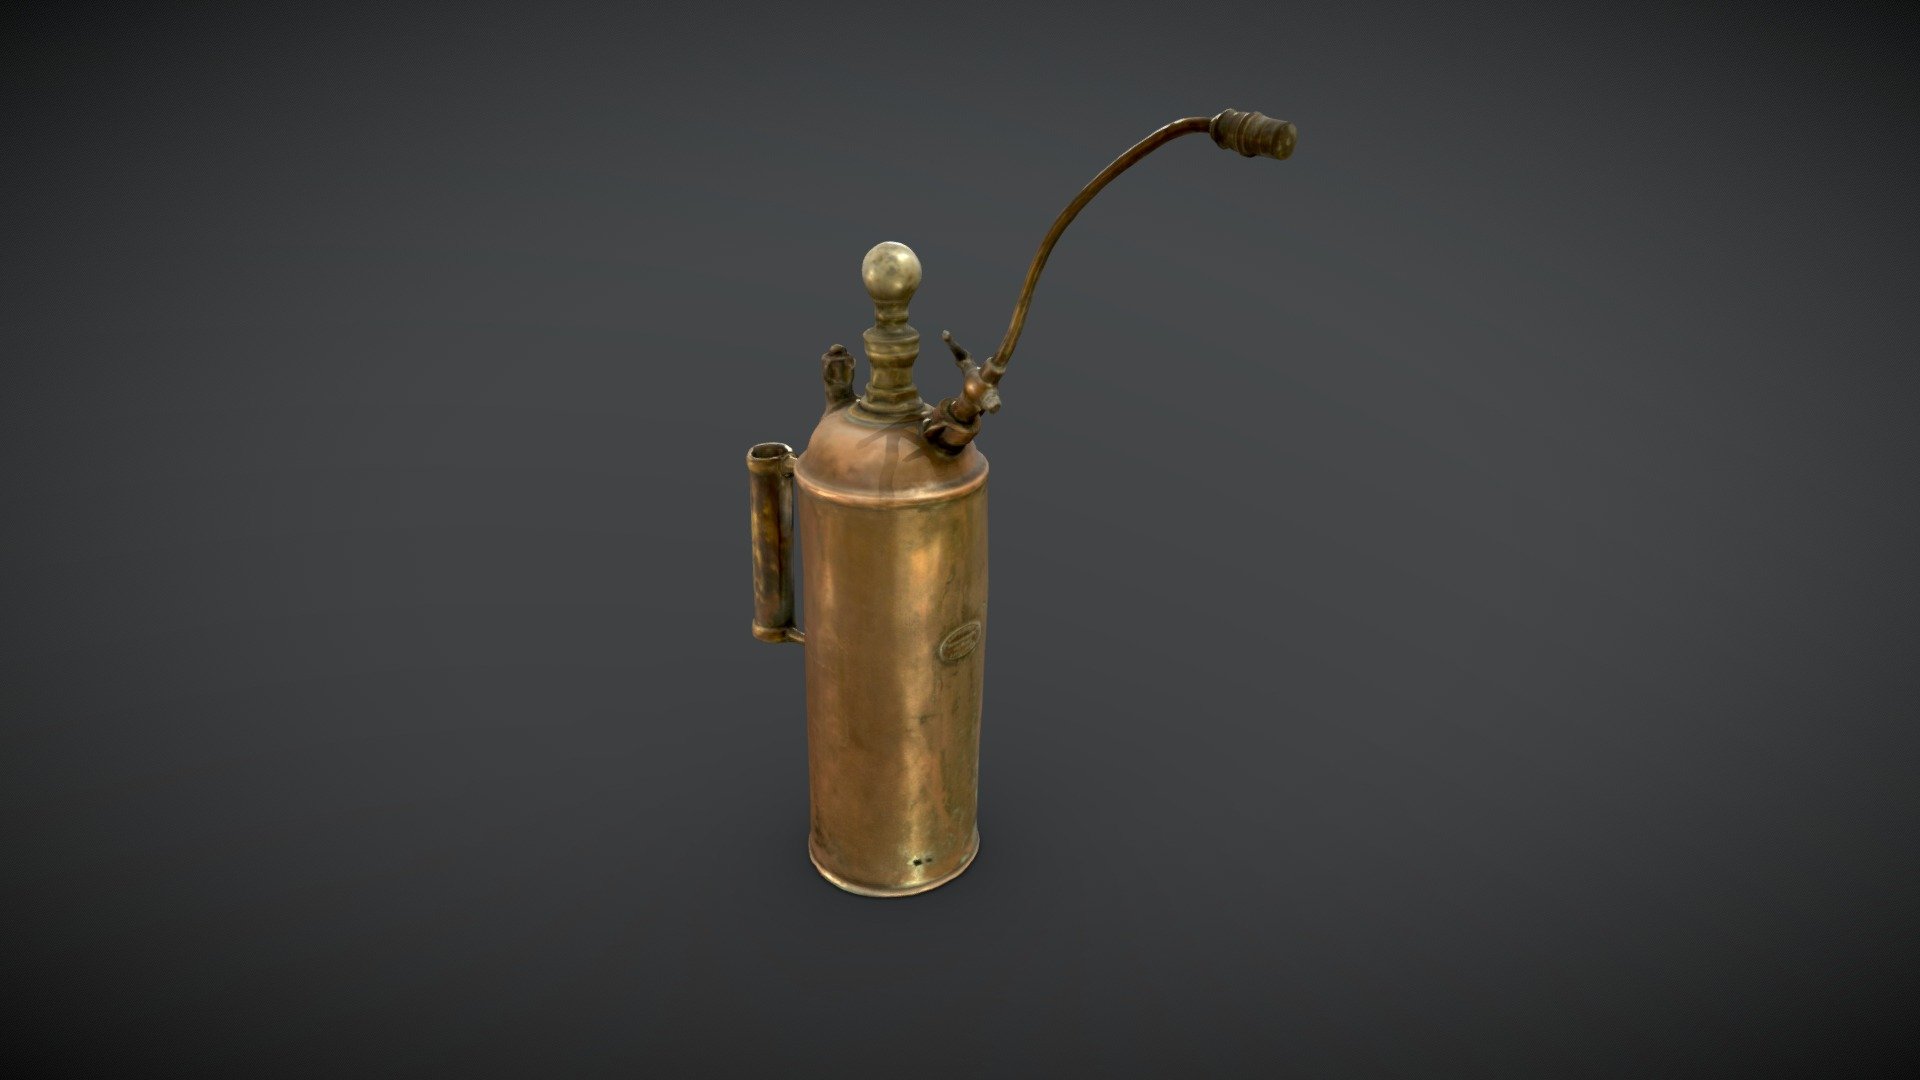 This spray can was used to help slow the spread of malaria, a life-threatening disease carried by mosquitoes. The can contained water with particles of a green powder suspended in it. The powder, called Paris green, was very successful at killing mosquito larvae. This spray can was made during World War I (1914-1918), and was probably used by British soldiers.

Use our 3D antimosquito spray model in the classroom to bring your curriculum teaching to life: https://learning-resources.sciencemuseum.org.uk/resources/antimosquito-spray

Find out more in the Science Museum Group online collection: https://collection.sciencemuseumgroup.org.uk/objects/co148025/ - Mosquito spray - Download Free 3D model by Science Museum Group (@sciencemuseum) 3d model